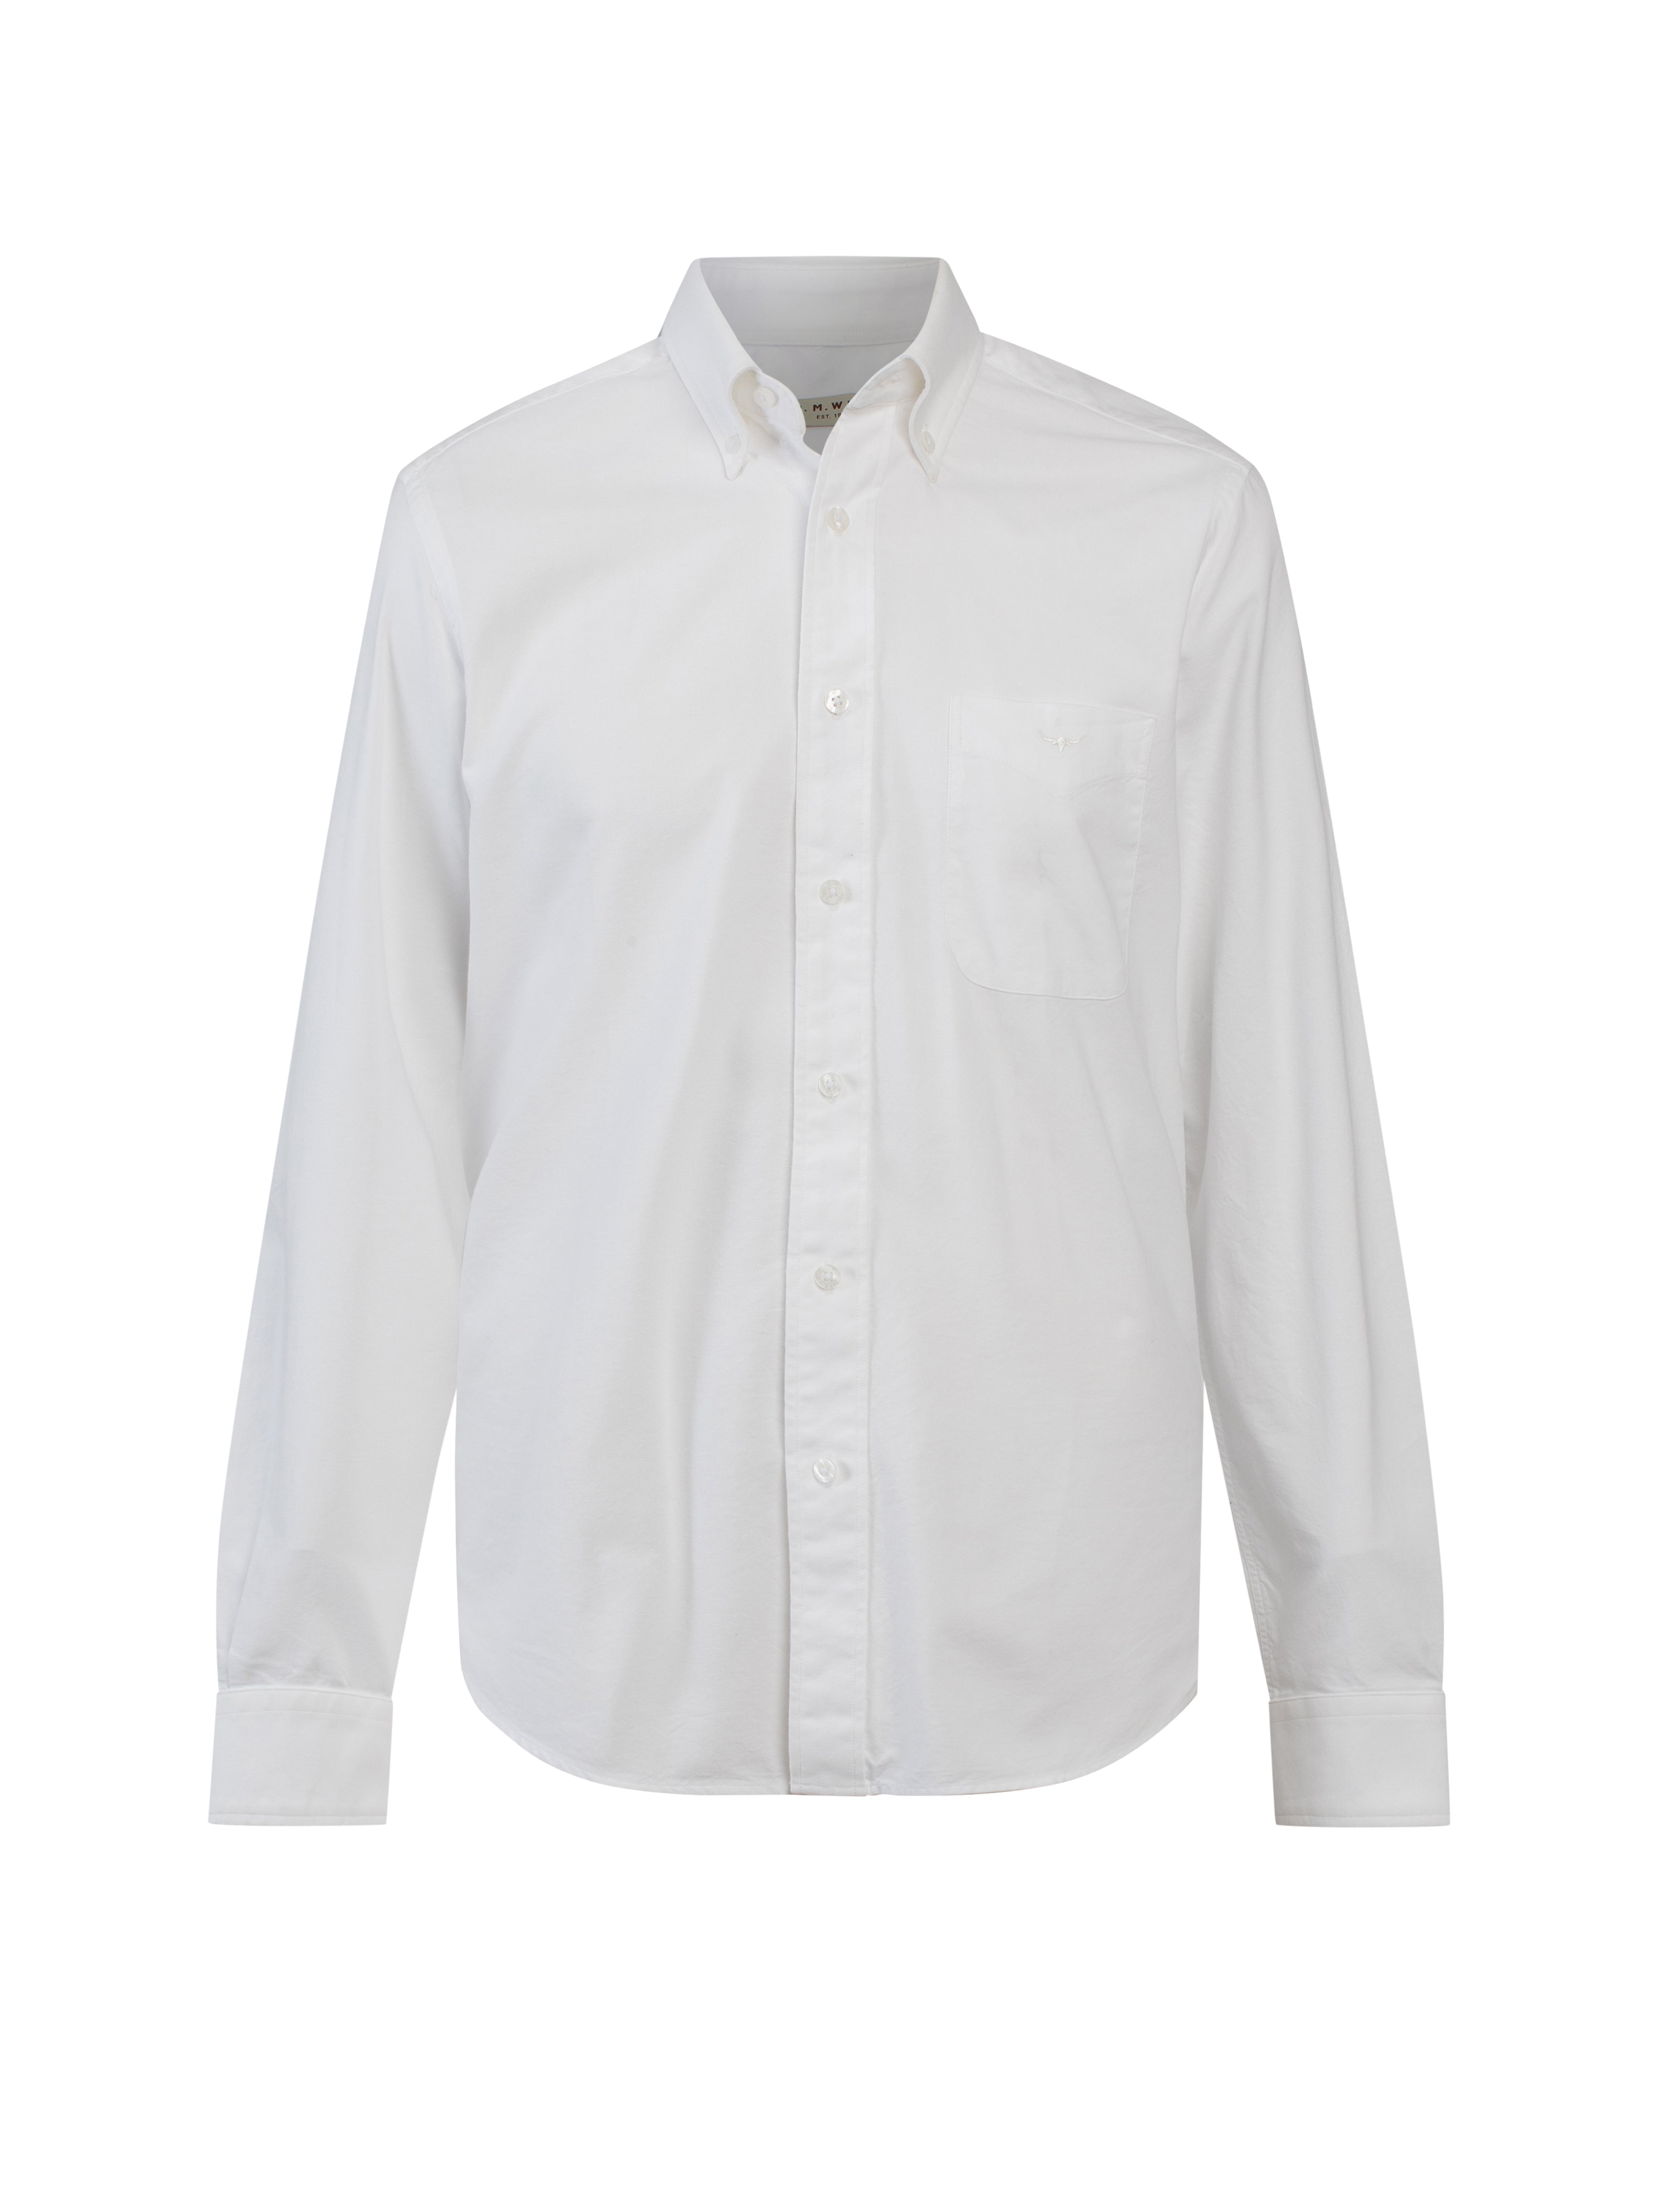 Jervis button down shirt - white Long Sleeve Shirts R.M.